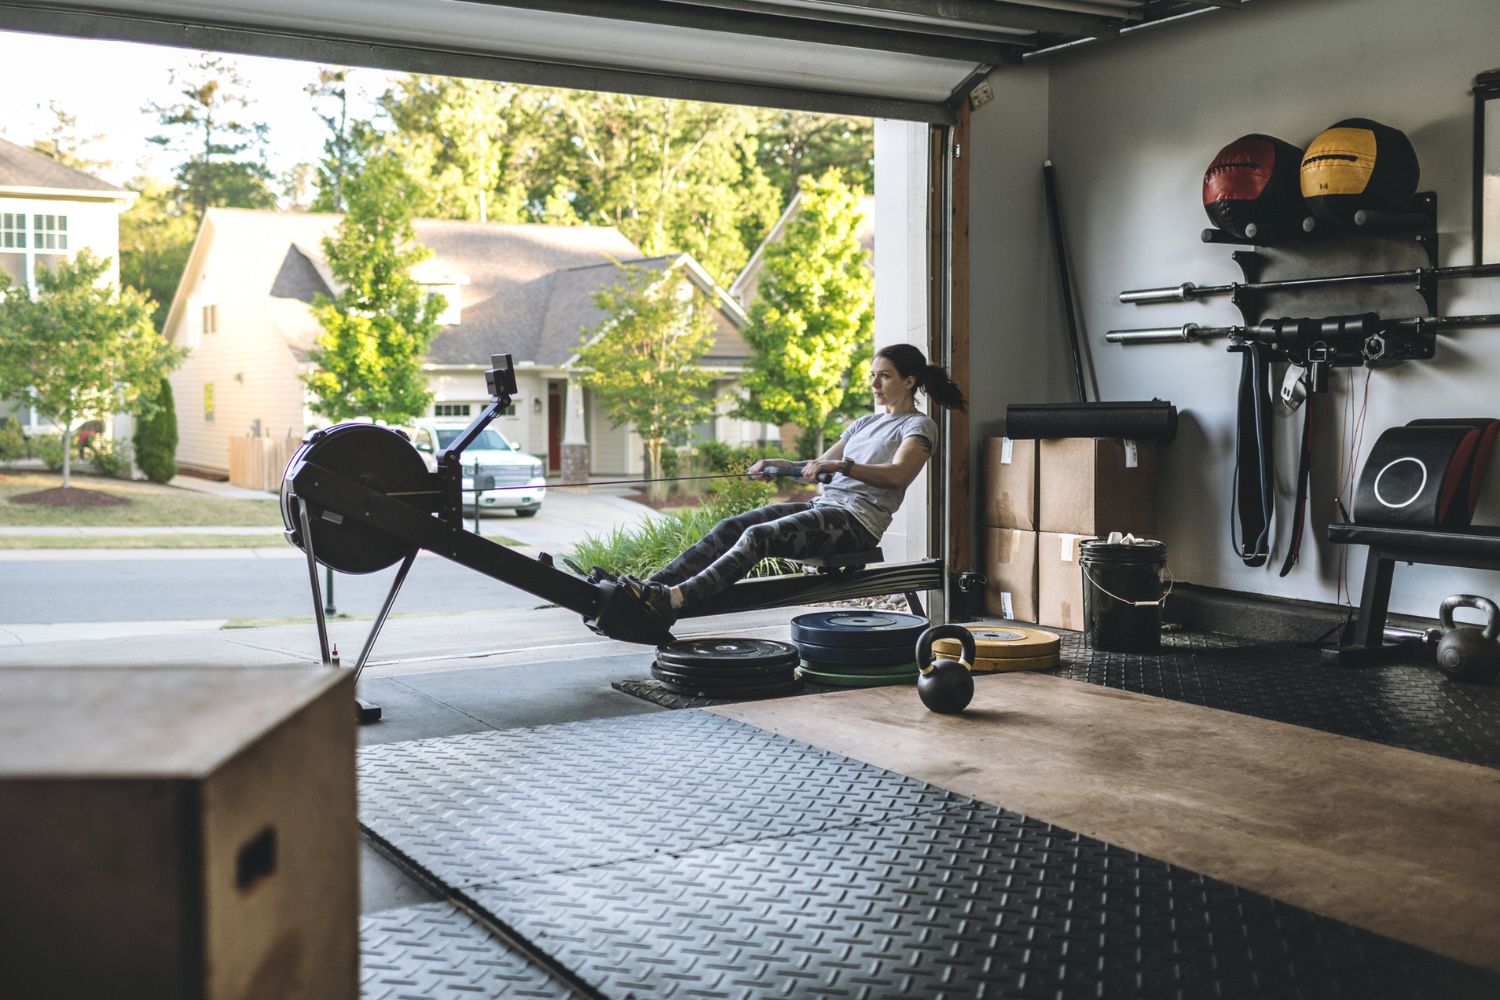 A garage has been converted to a gym.